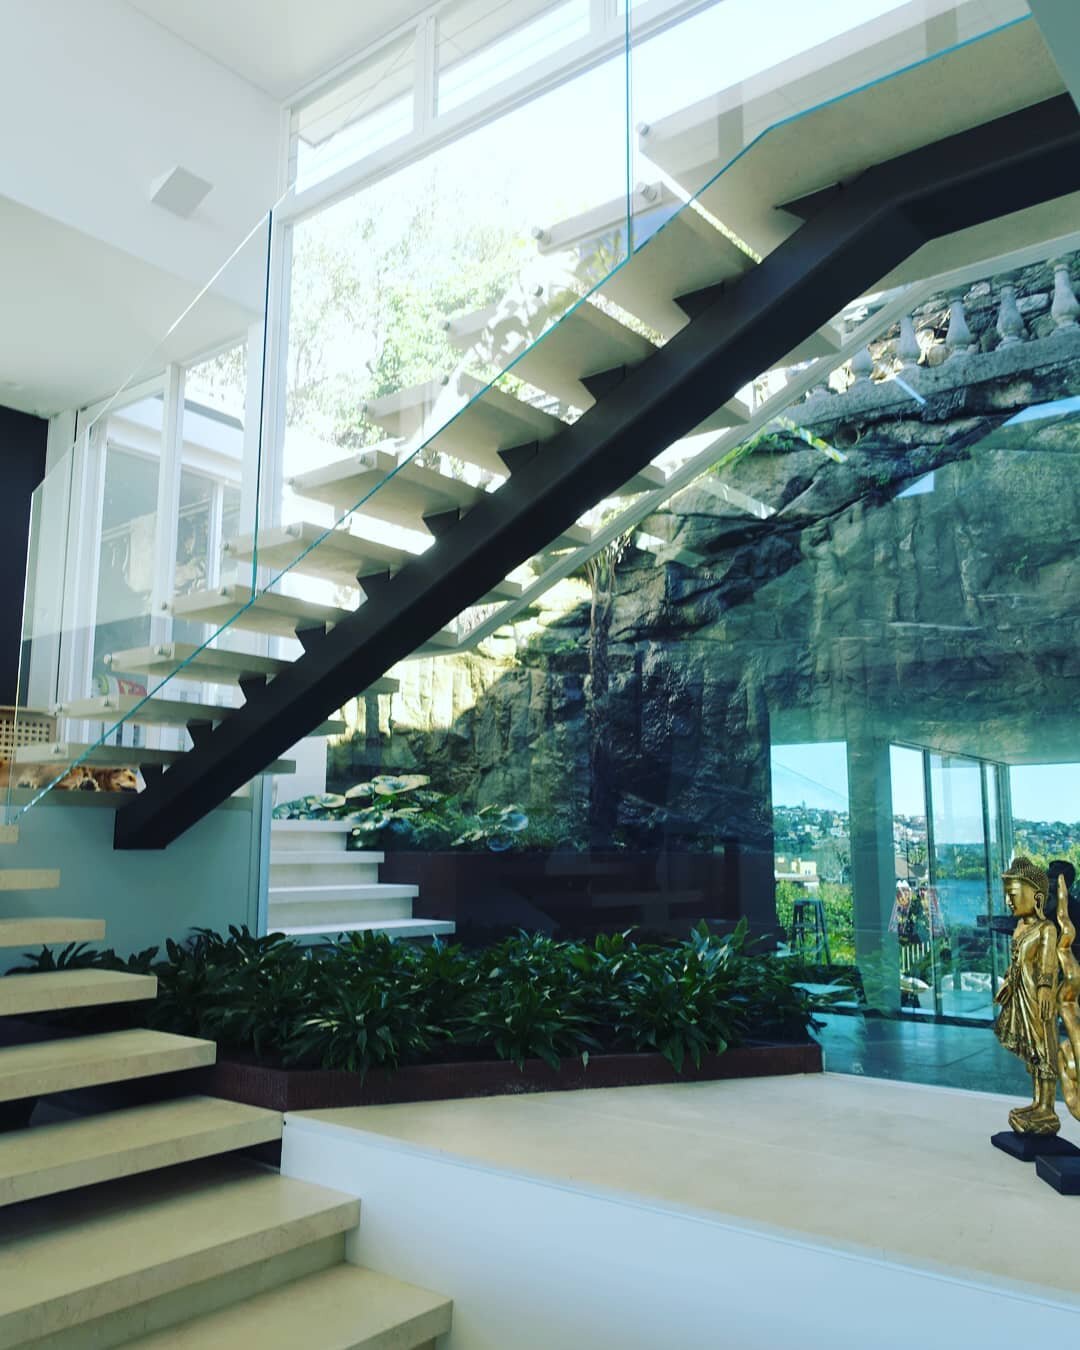 Stairway to Heaven❓
Follow / Share / Bookmark / Tell us
🔸️Cut sandstone wall exterior
🔸️Cantilevered stairs linking private and shared spaces&nbsp;
🔸️Showcasing the natural features of the interiors and exteriors
🔸️Seamlessly connecting inside an